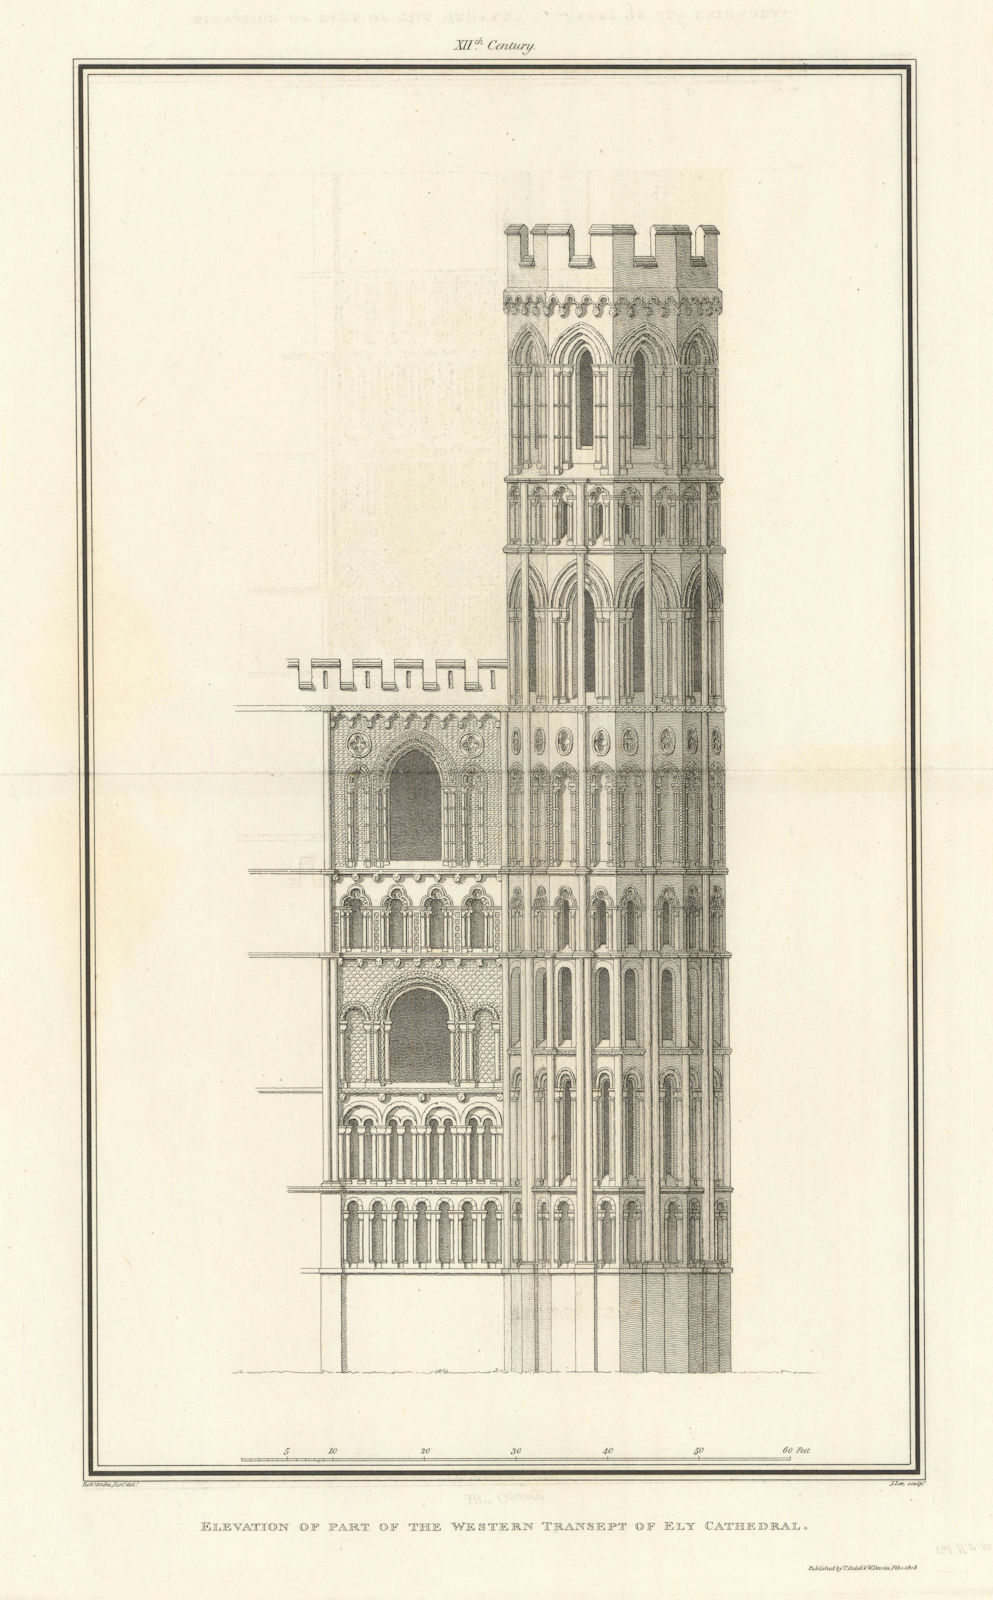 Elevation of part of the Western Transept of Ely Cathedral. SMIRKE 1810 print